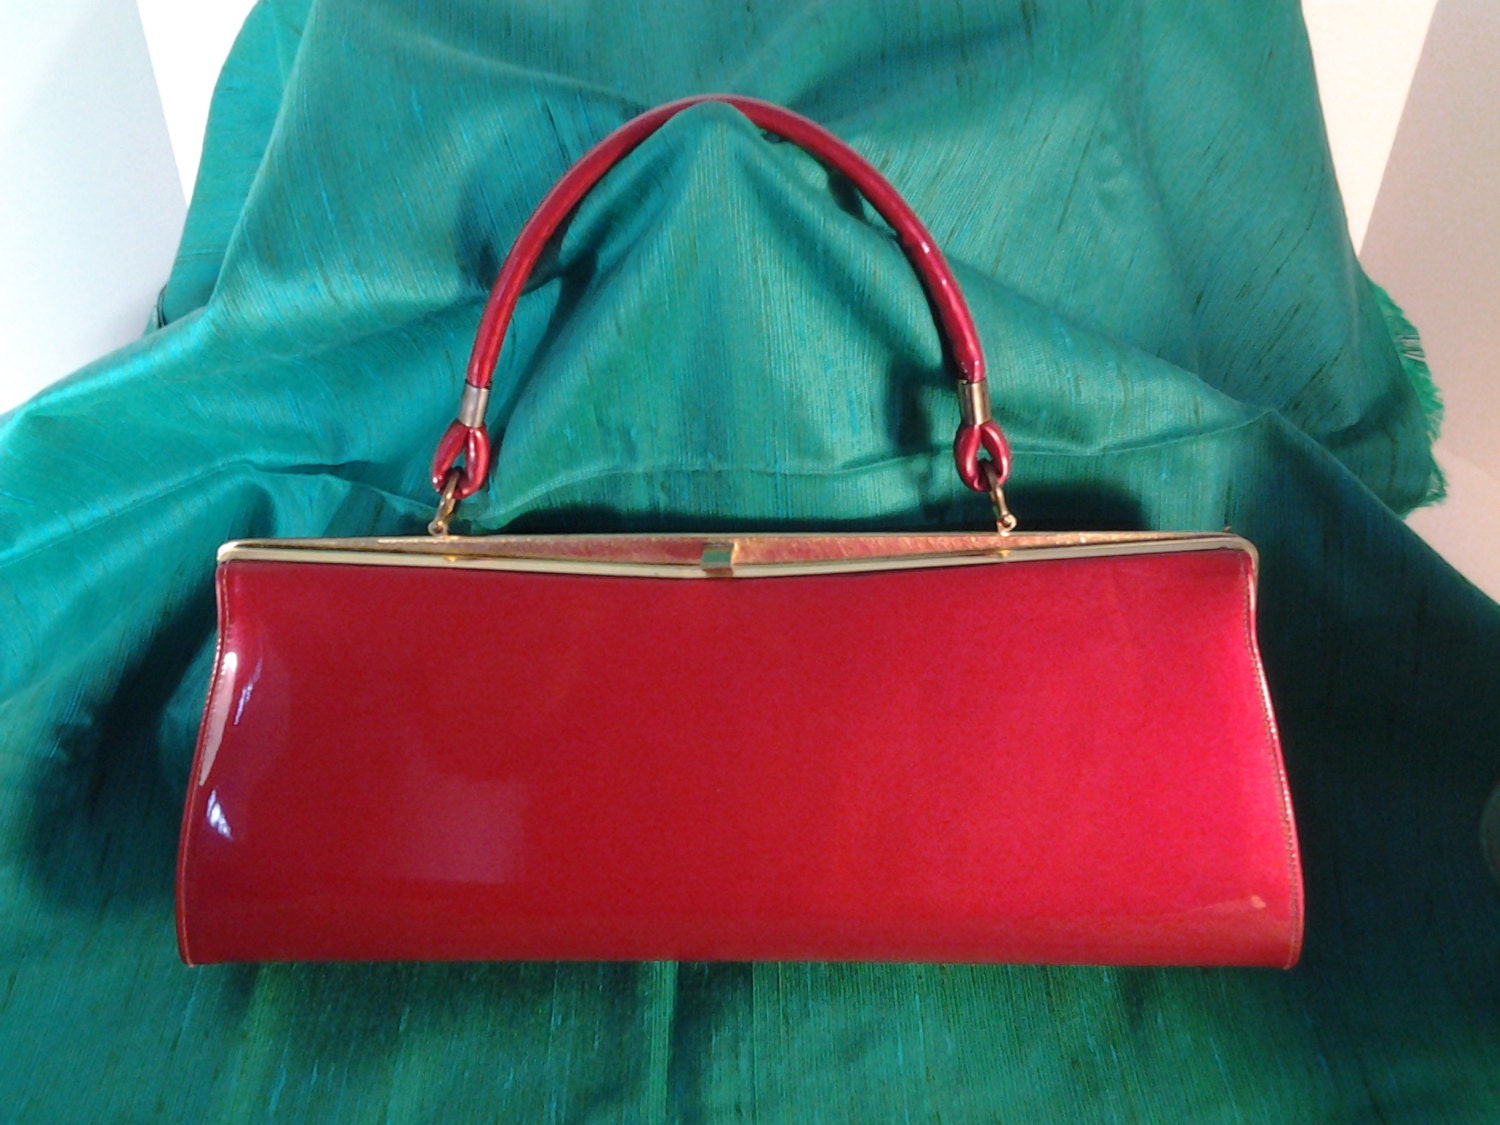 Red Patent Leather 1950s Handbag Mad Men Style